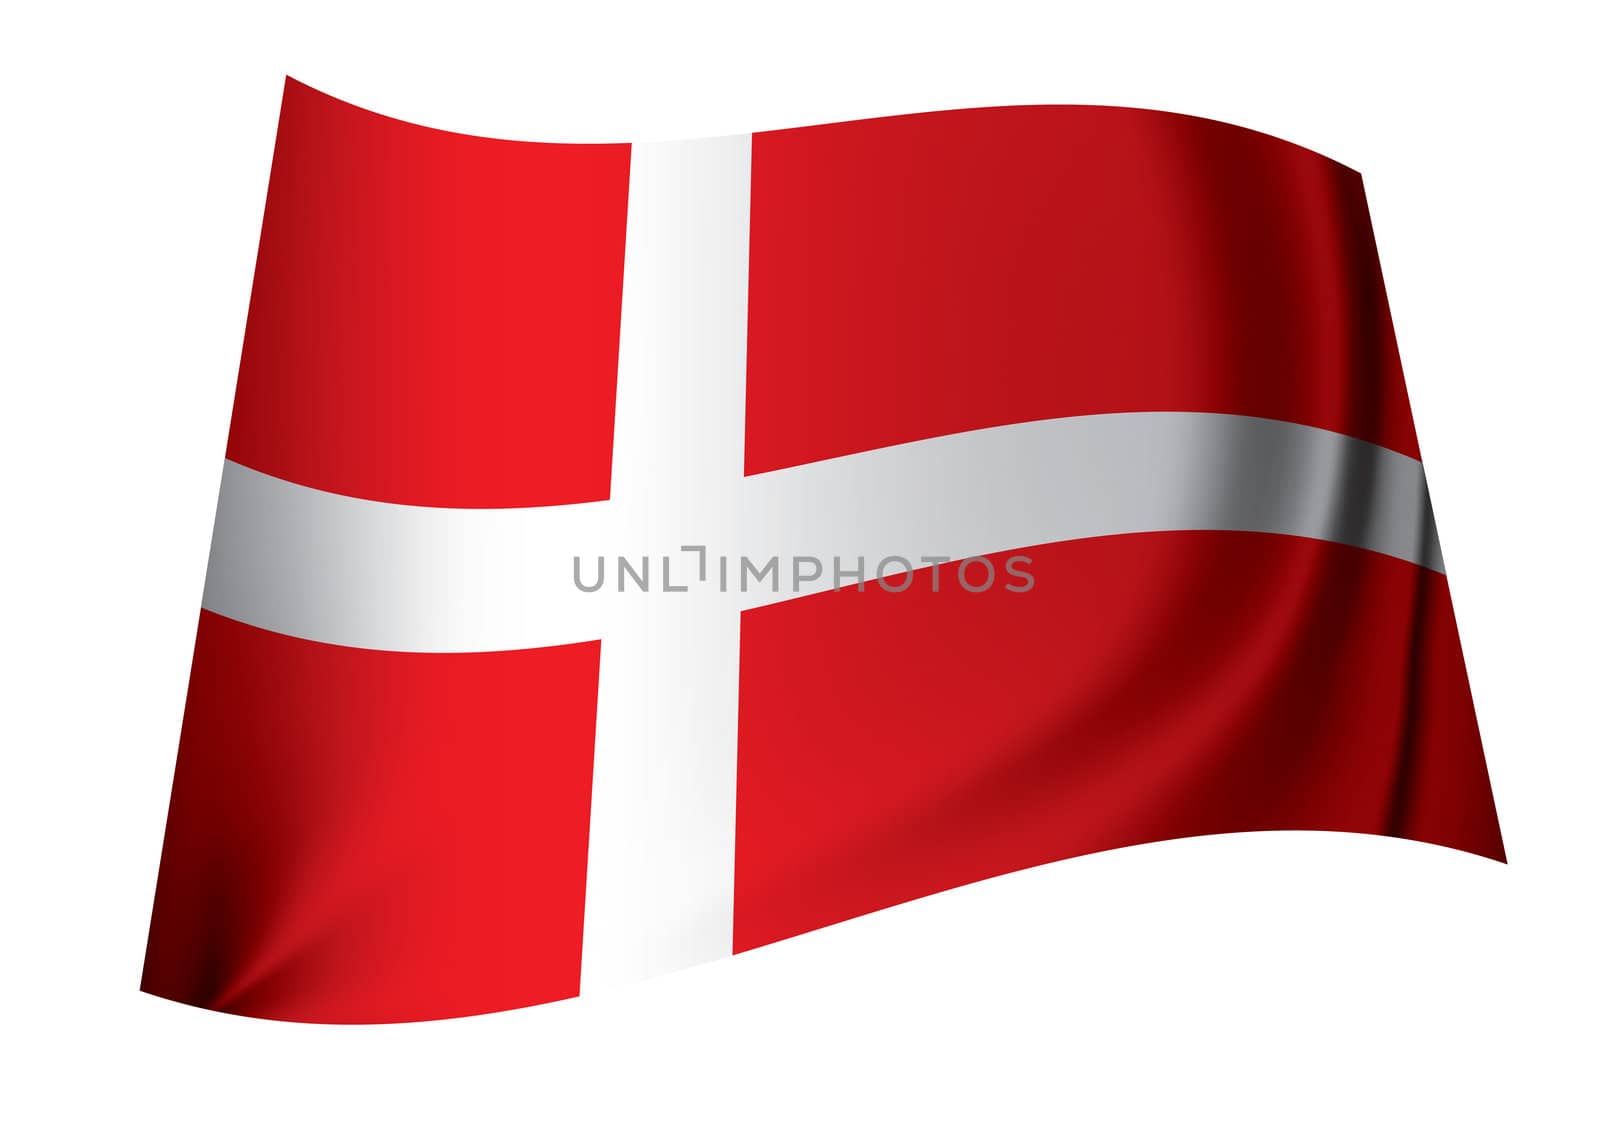 red and white danish flag floating in the wind icon for denmark